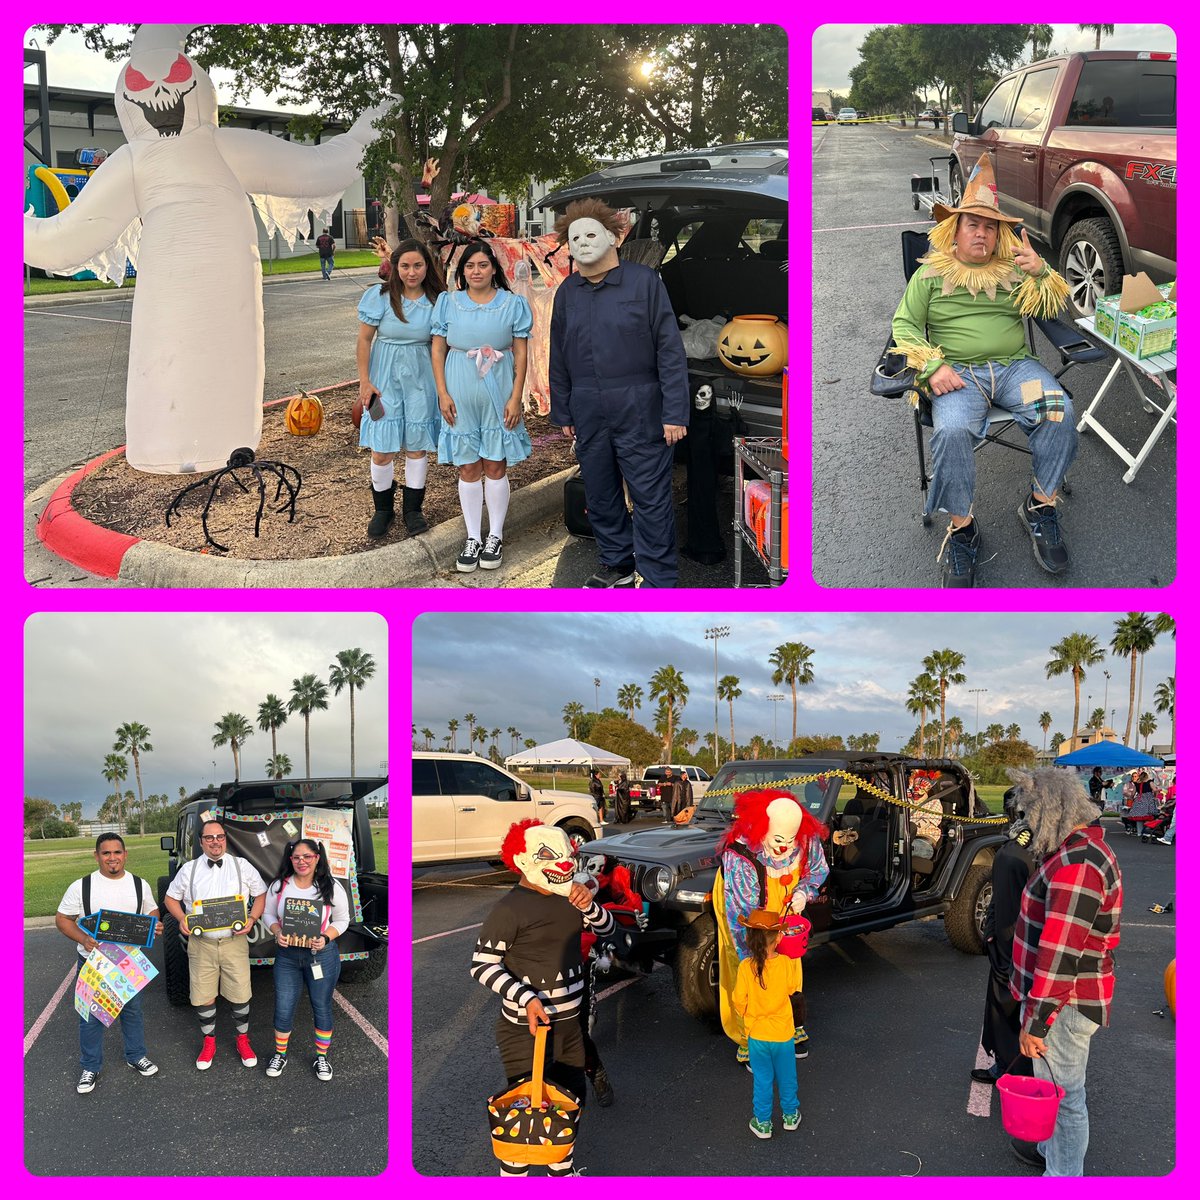 Celebrating #Halloween2022 with our #AmazingEmployees in Mission,TX #CEC #MagentaLife @MissionTXperts  @luluayala81 @VictorF0907  @Aejaz_H  @m_wan4life